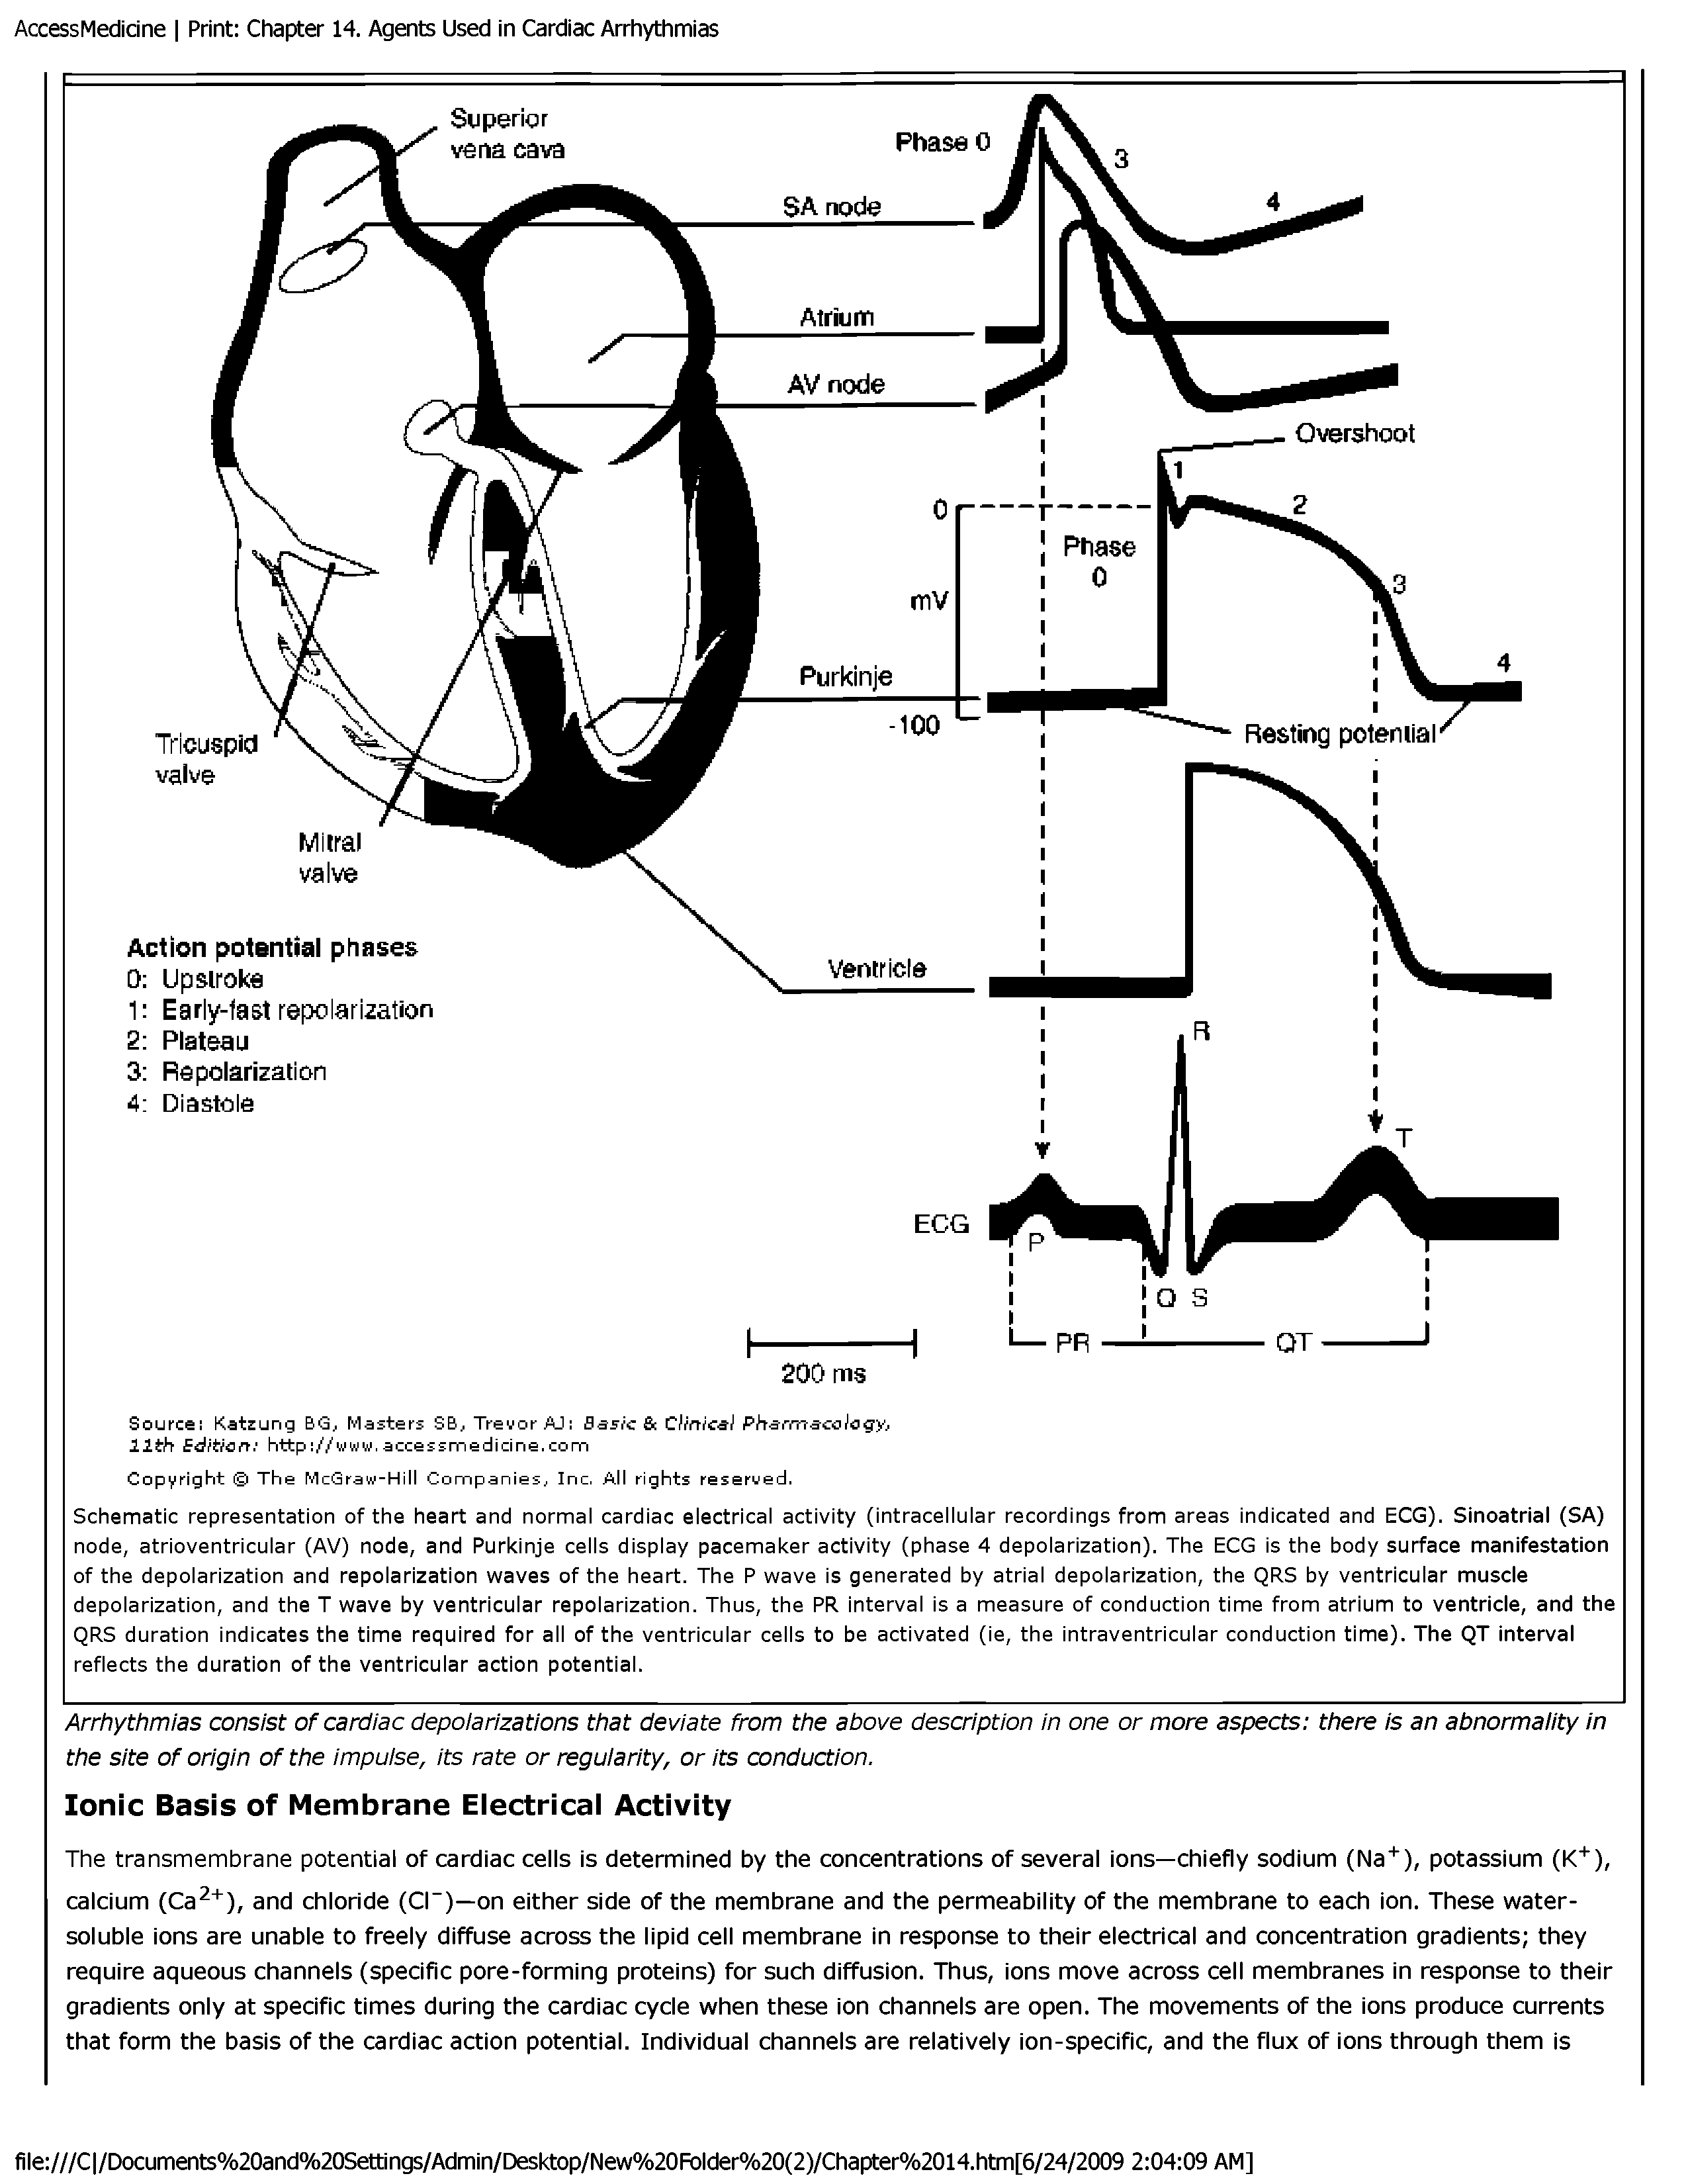 Schematic representation of the heart and normal cardiac electrical activity (intracellular recordings from areas indicated and ECG). Sinoatrial (SA) node, atrioventricular (AV) node, and Purkinje cells display pacemaker activity (phase 4 depolarization). The ECG is the body surface manifestation of the depolarization and repolarization waves of the heart. The P wave is generated by atrial depolarization, the QRS by ventricular muscle depolarization, and the T wave by ventricular repolarization. Thus, the PR interval is a measure of conduction time from atrium to ventricle, and the QRS duration indicates the time required for all of the ventricular cells to be activated (ie, the intraventricular conduction time). The QT interval reflects the duration of the ventricular action potential.